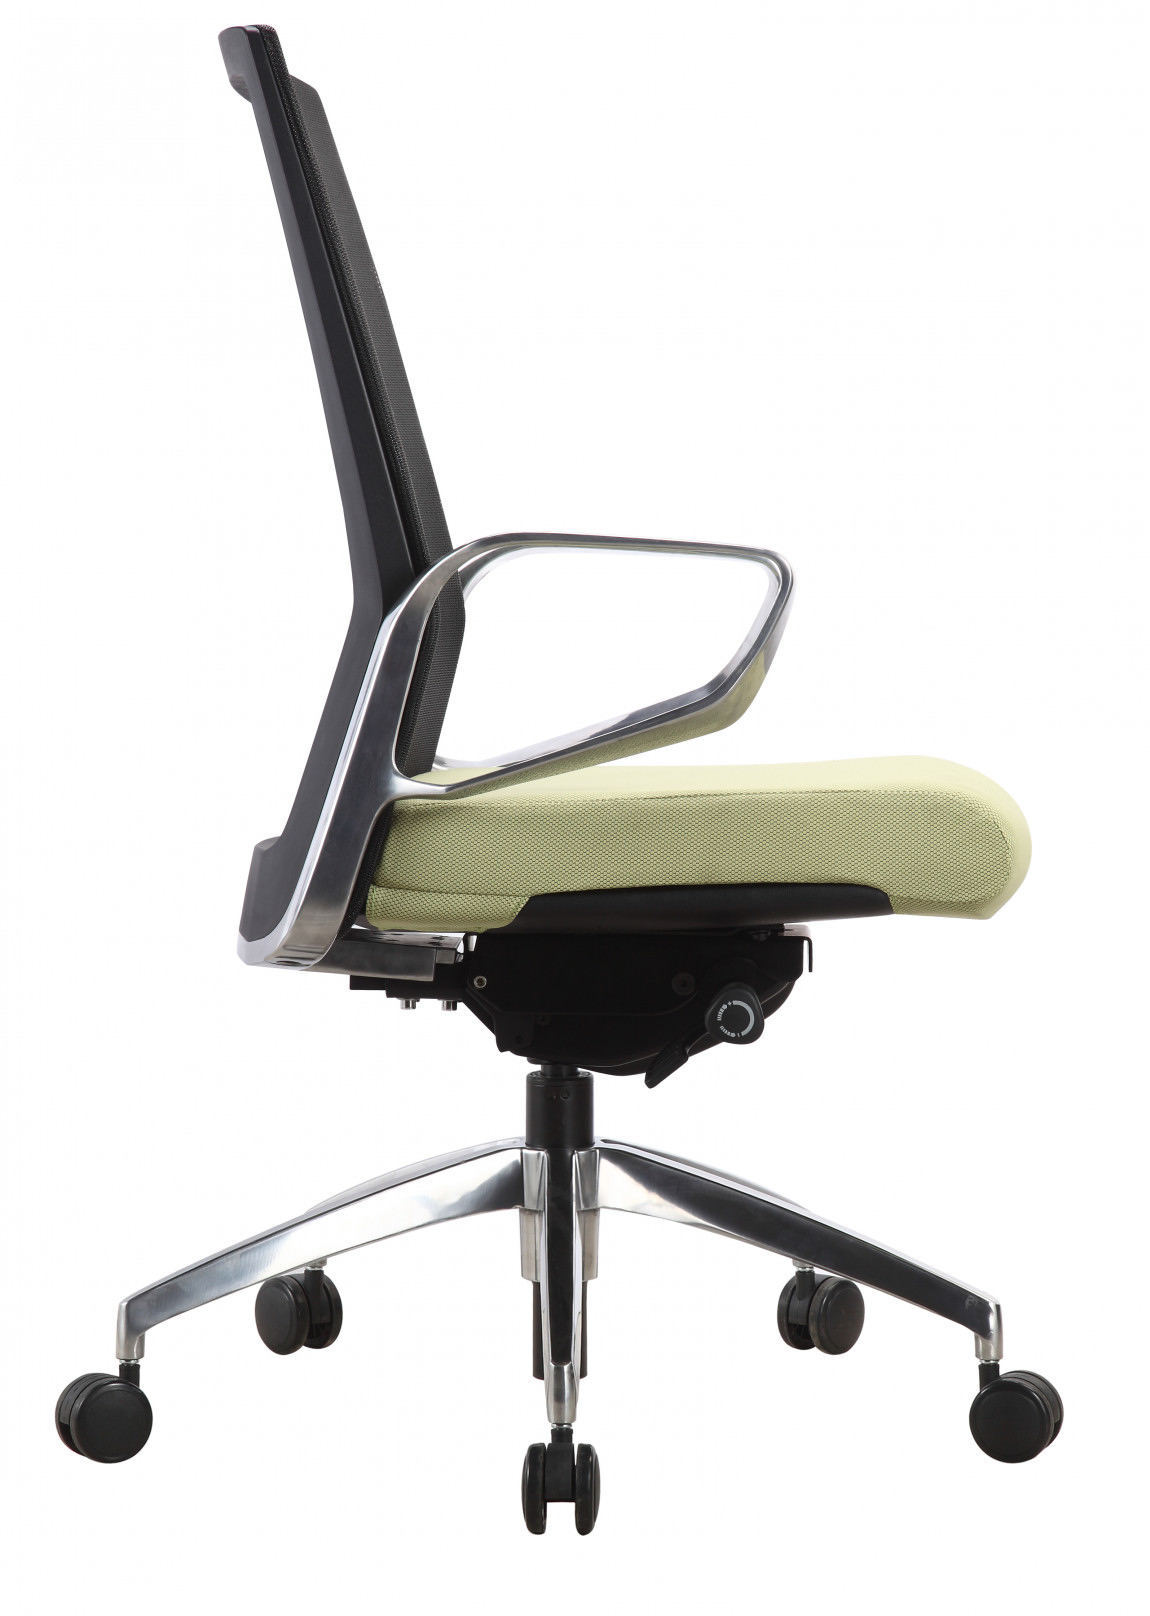 Executive Task Chair with Green Seat Cover